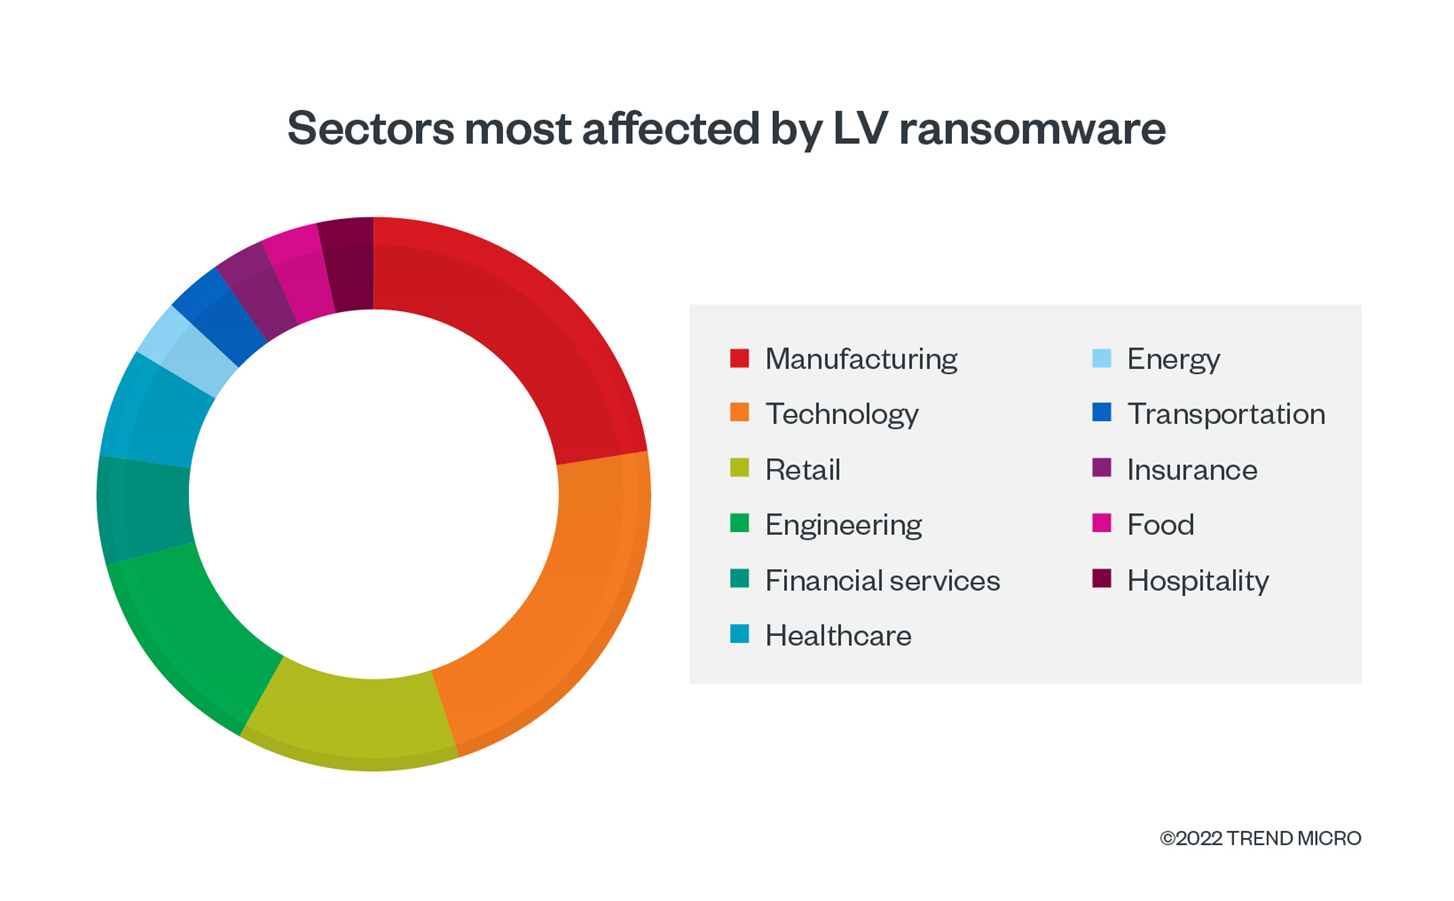 Figure 6. The sectors most affected by LV ransomware in 2022